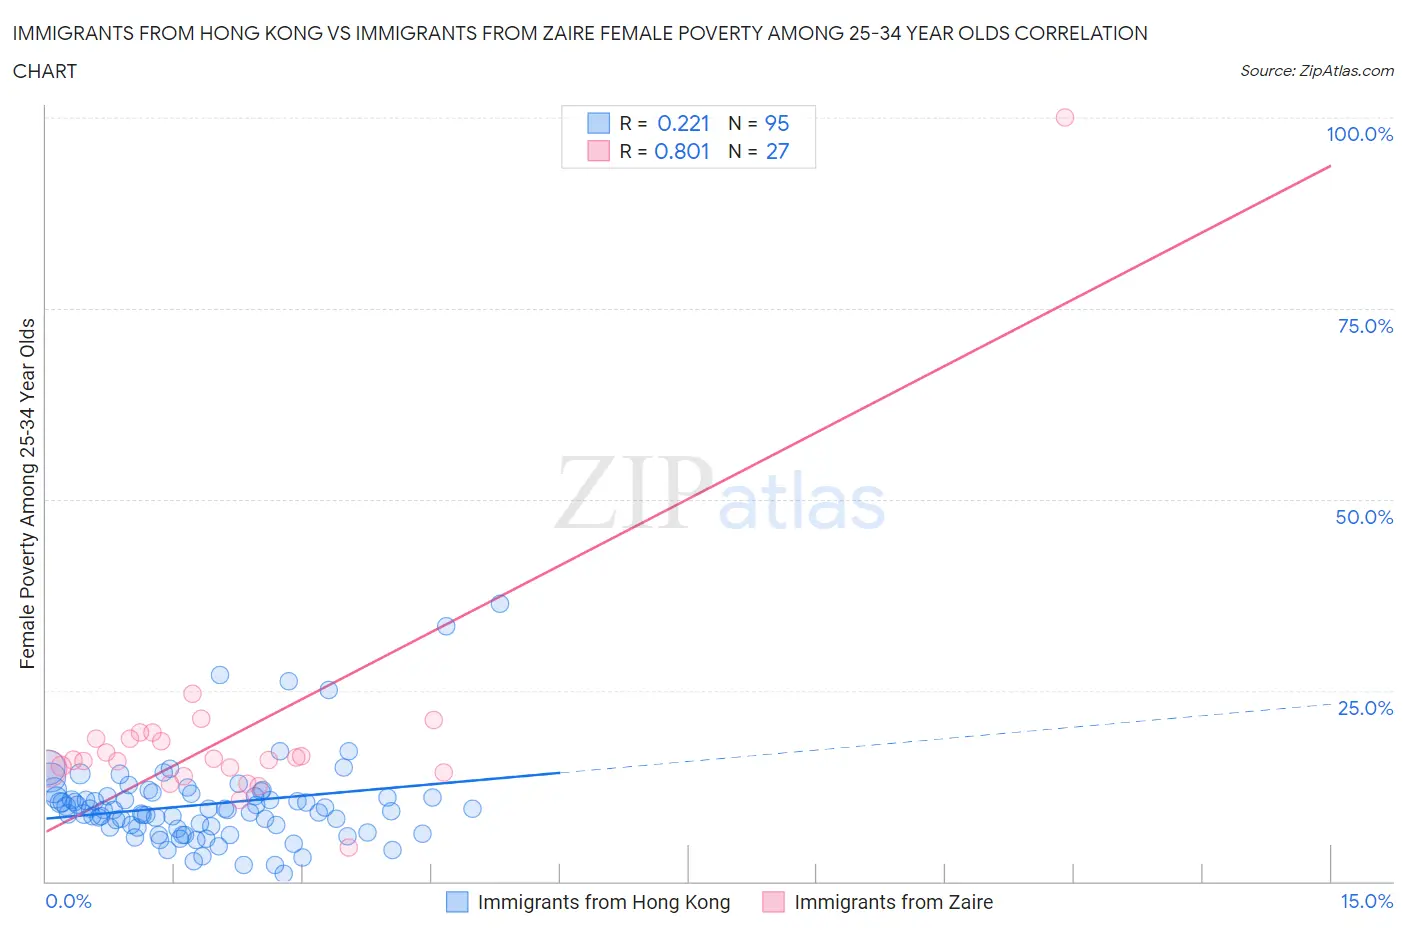 Immigrants from Hong Kong vs Immigrants from Zaire Female Poverty Among 25-34 Year Olds